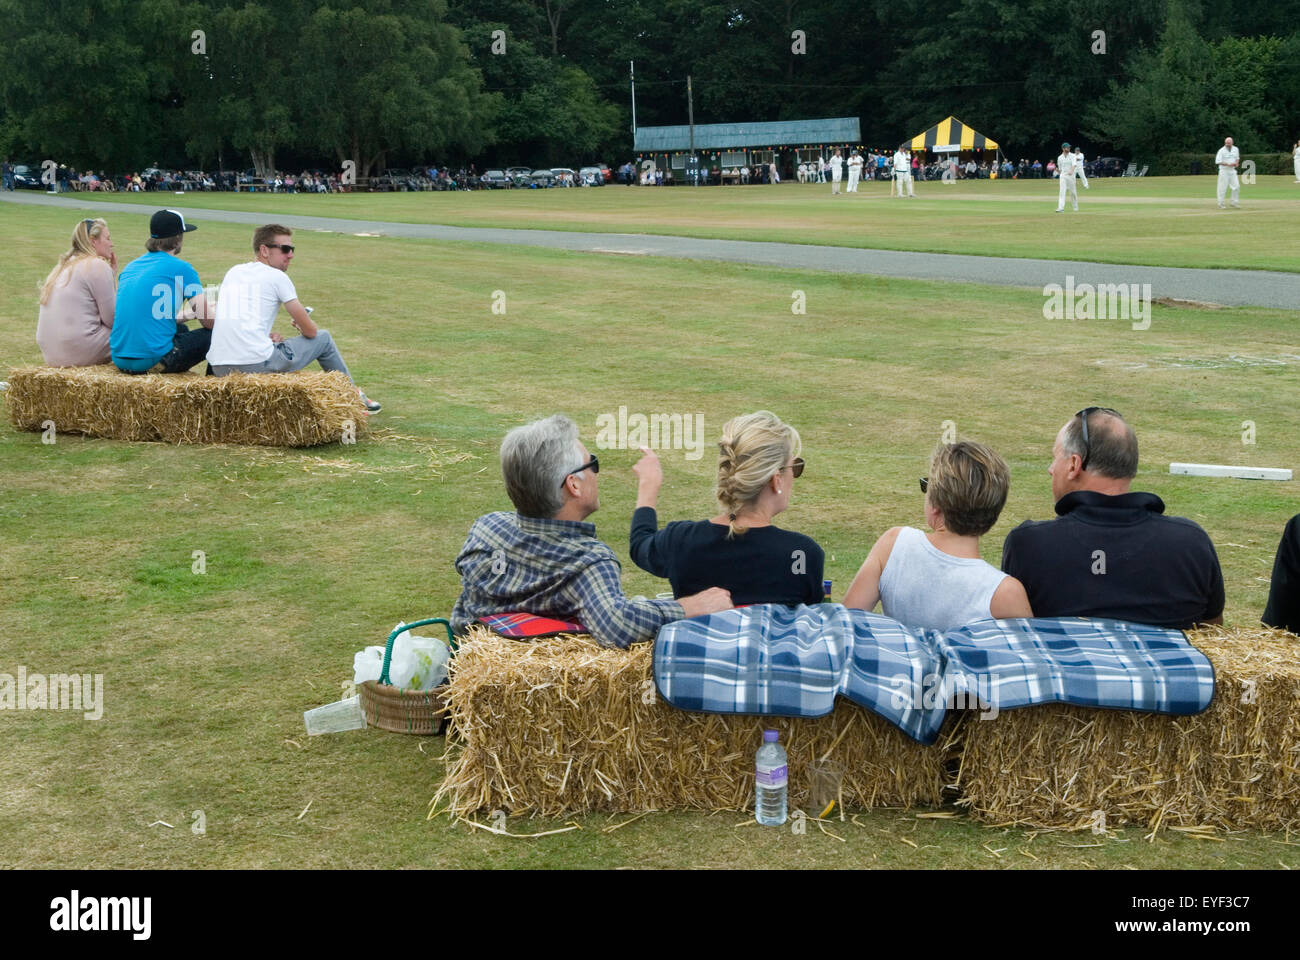 Village Cricket lazy afternoon, people relaxed and watching a game of cricket 2015 2010s Sussex Nr Petworth West Sussex, England UK HOMER SYKES Stock Photo